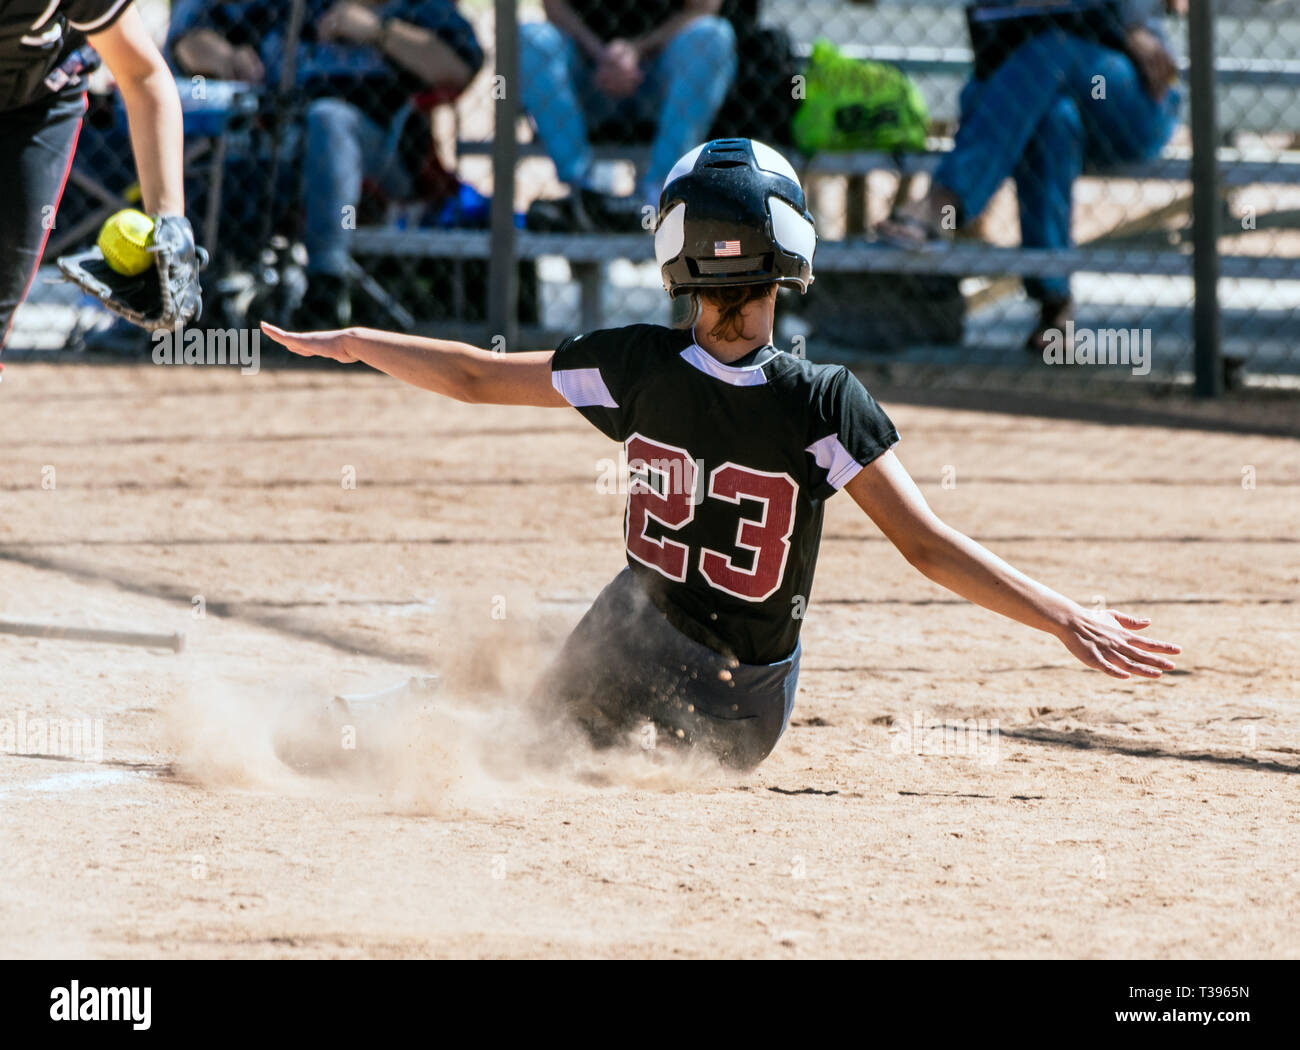 Female teenage softball player in black uniform sliding into home plate before the catcher can make the tag. Stock Photo